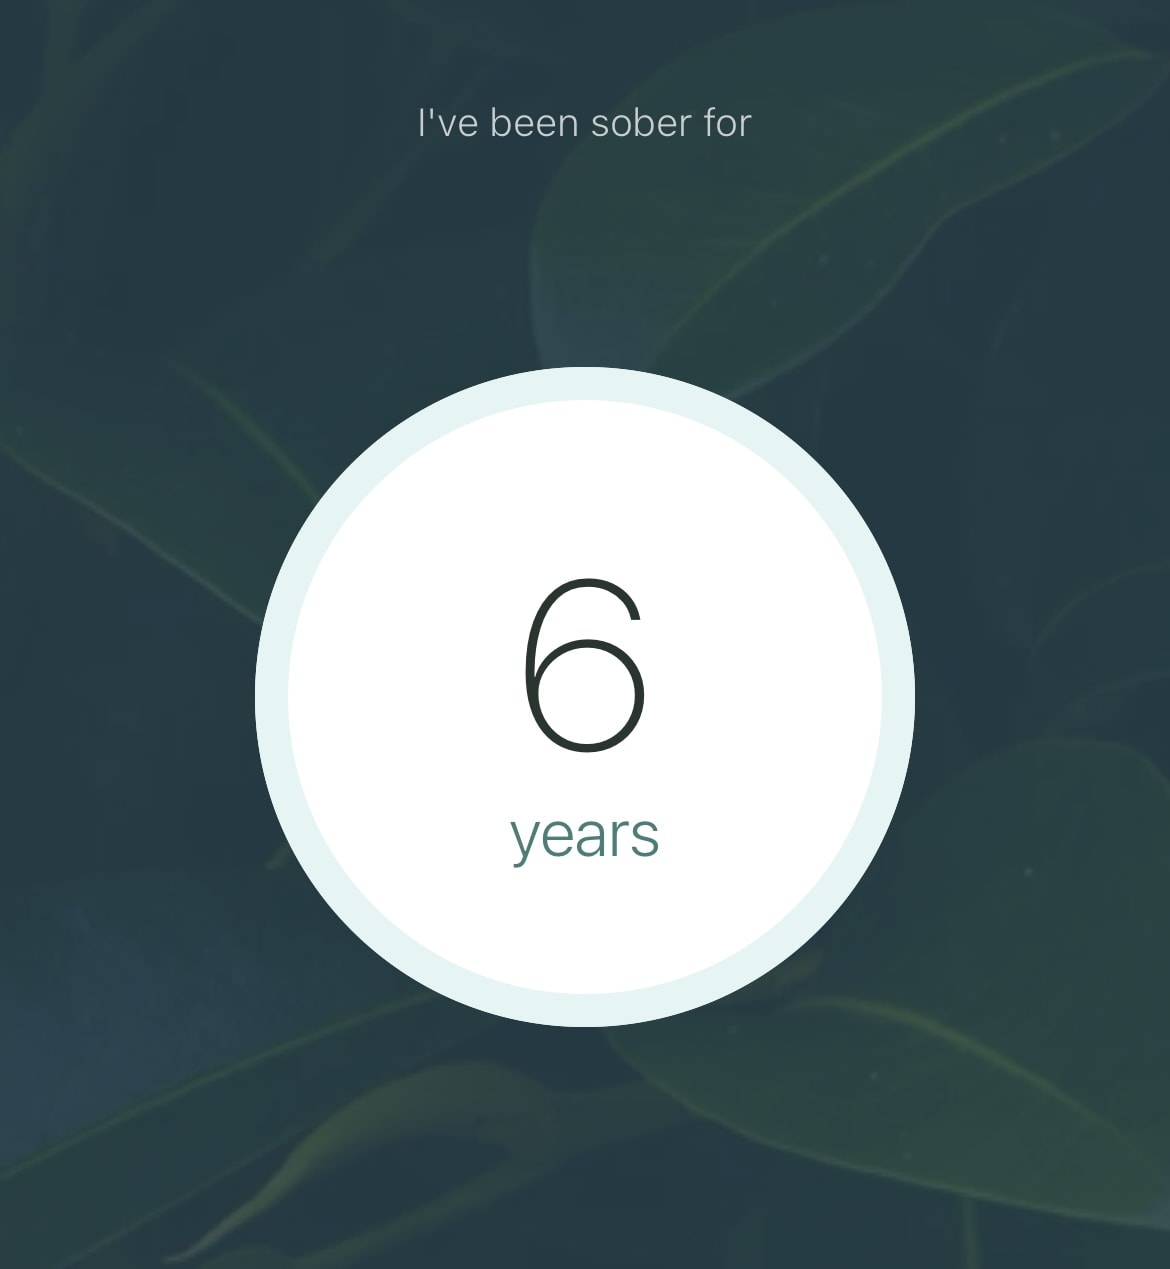 I &rsquo;ve been sober for six years